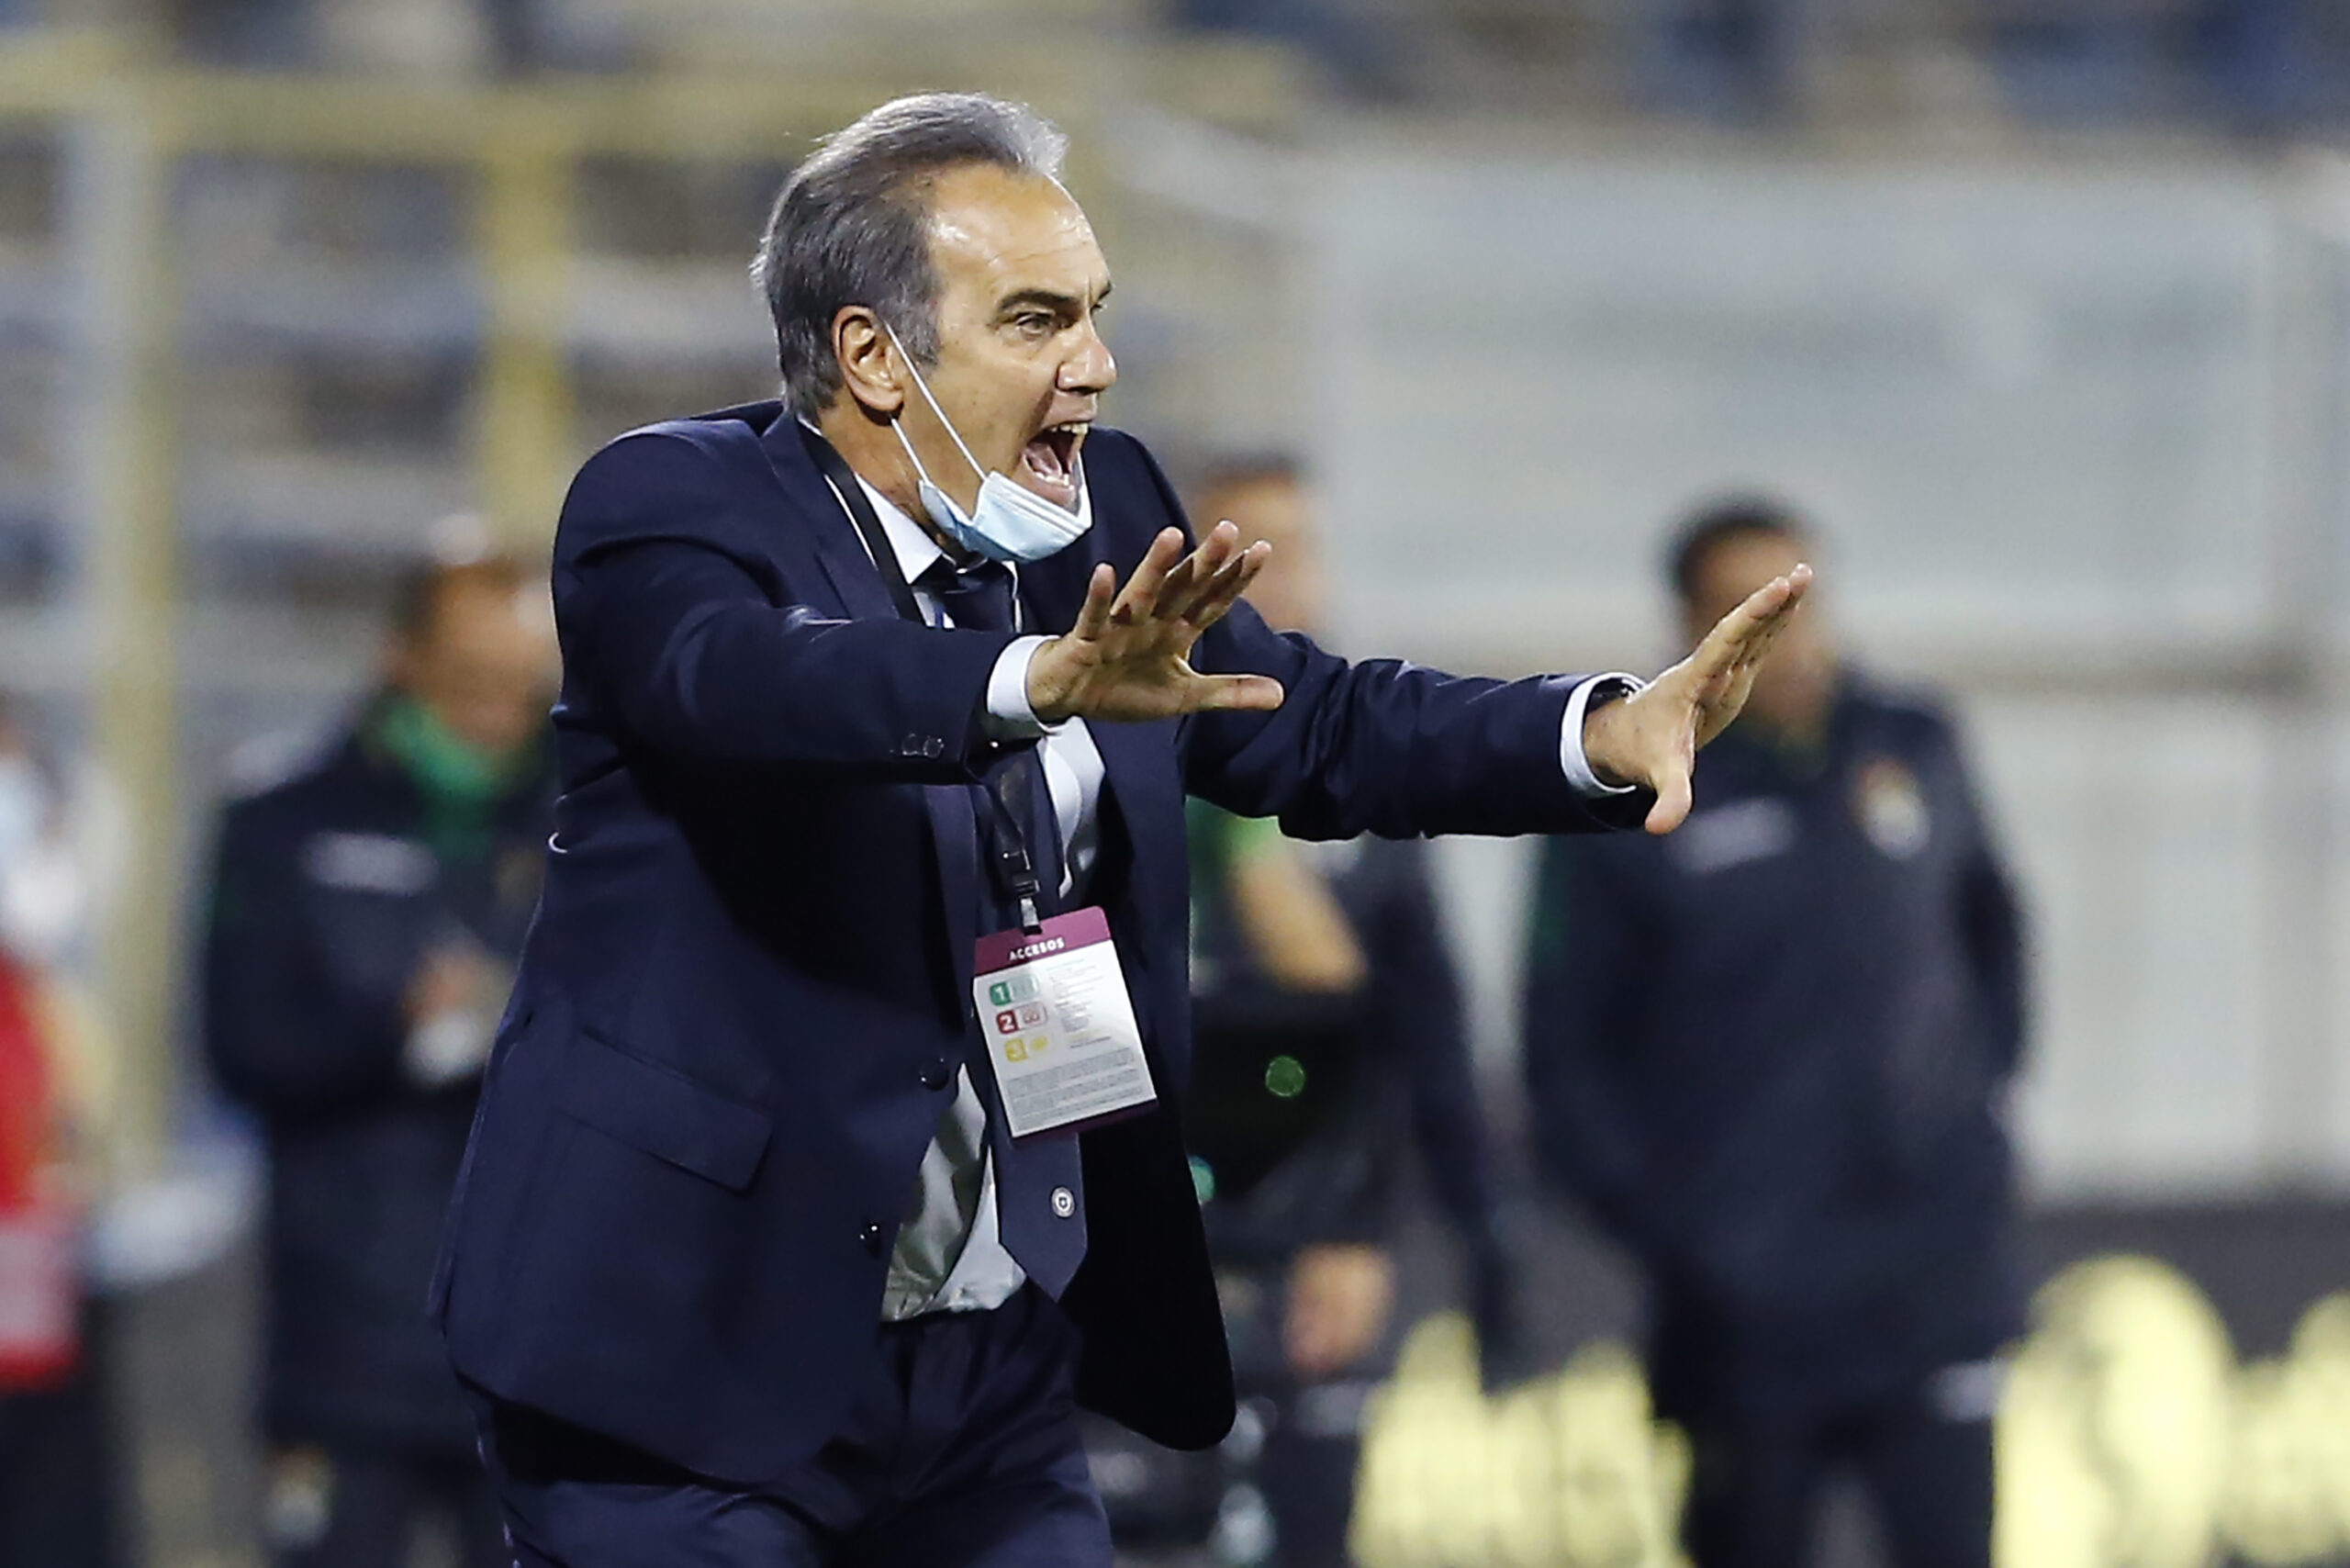 SANTIAGO, CHILE - JUNE 08: Martín Lasarte head coach of Chile during a match between Chile and Bolivia as part of South American Qualifiers for Qatar 2022 at Estadio San Carlos de Apoquindo on June 08, 2021 in Santiago, Chile. (Photo by Marcelo Hernandez/Getty Images)